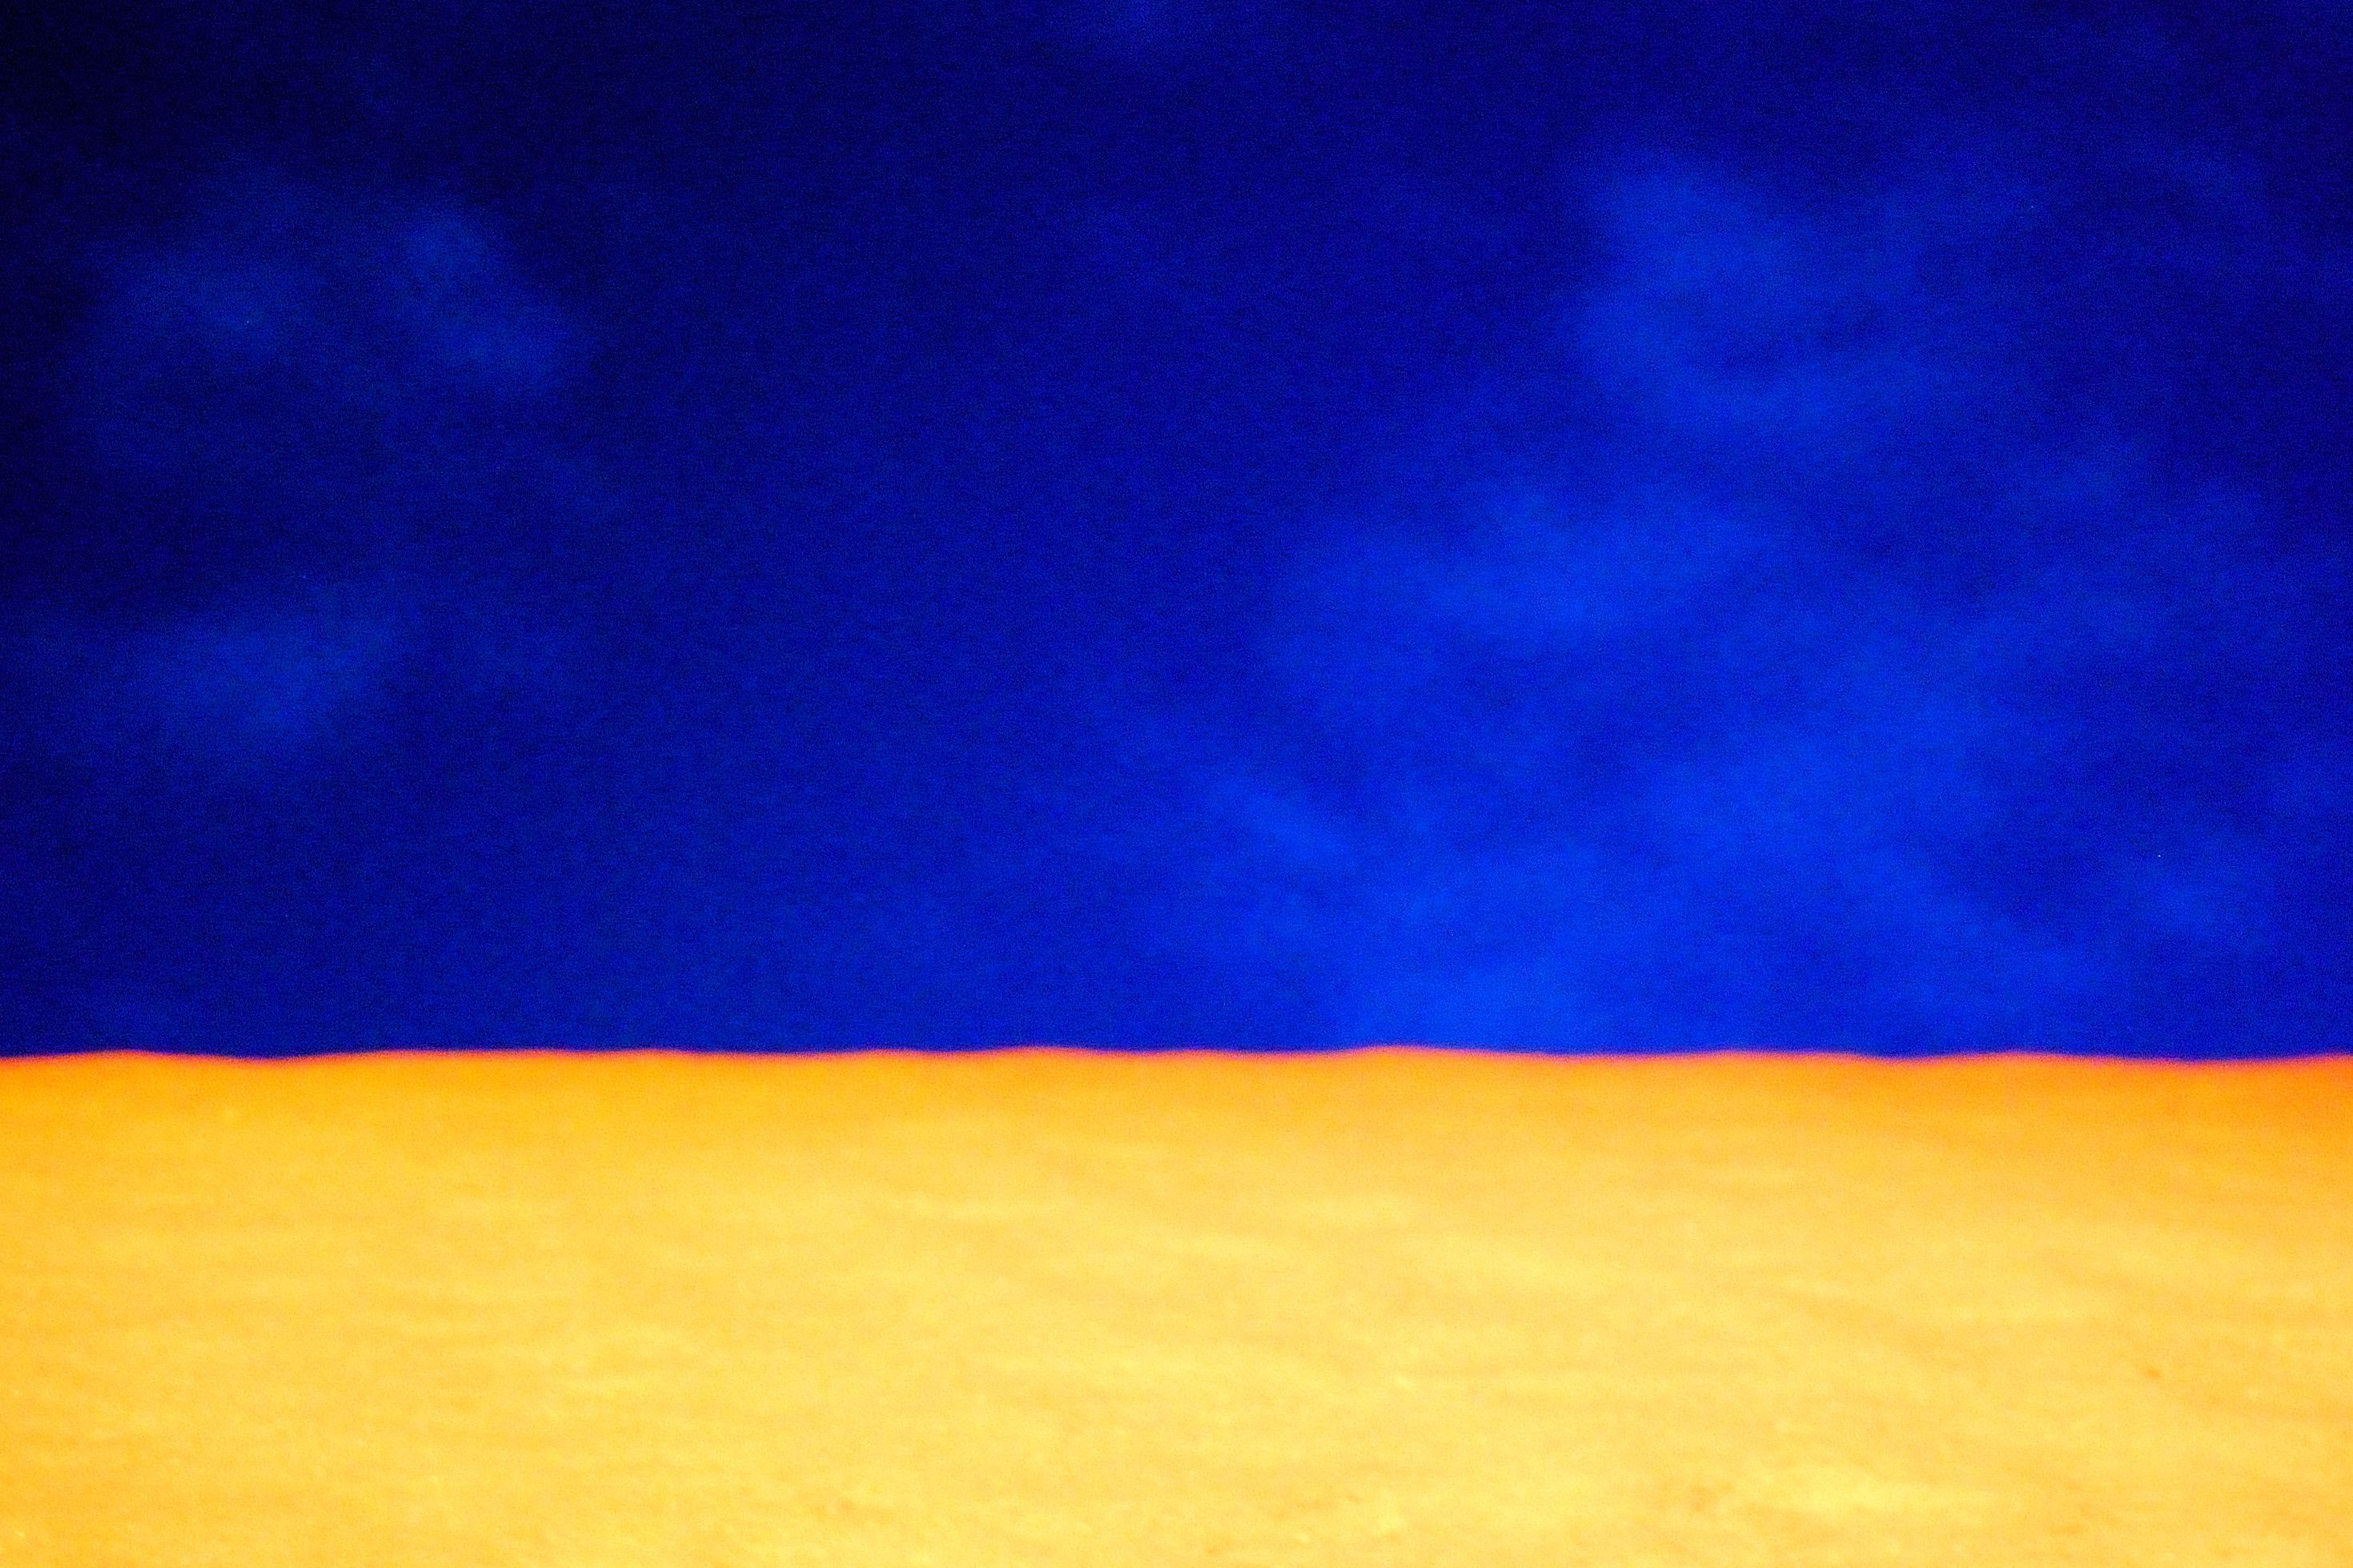 Free download Yellow Blue Wallpaper and Background Image stmednet [2939x1959] for your Desktop, Mobile & Tablet. Explore Blue And Yellow Wallpaper. Blue And Yellow Wallpaper, Blue and Yellow Wallpaper